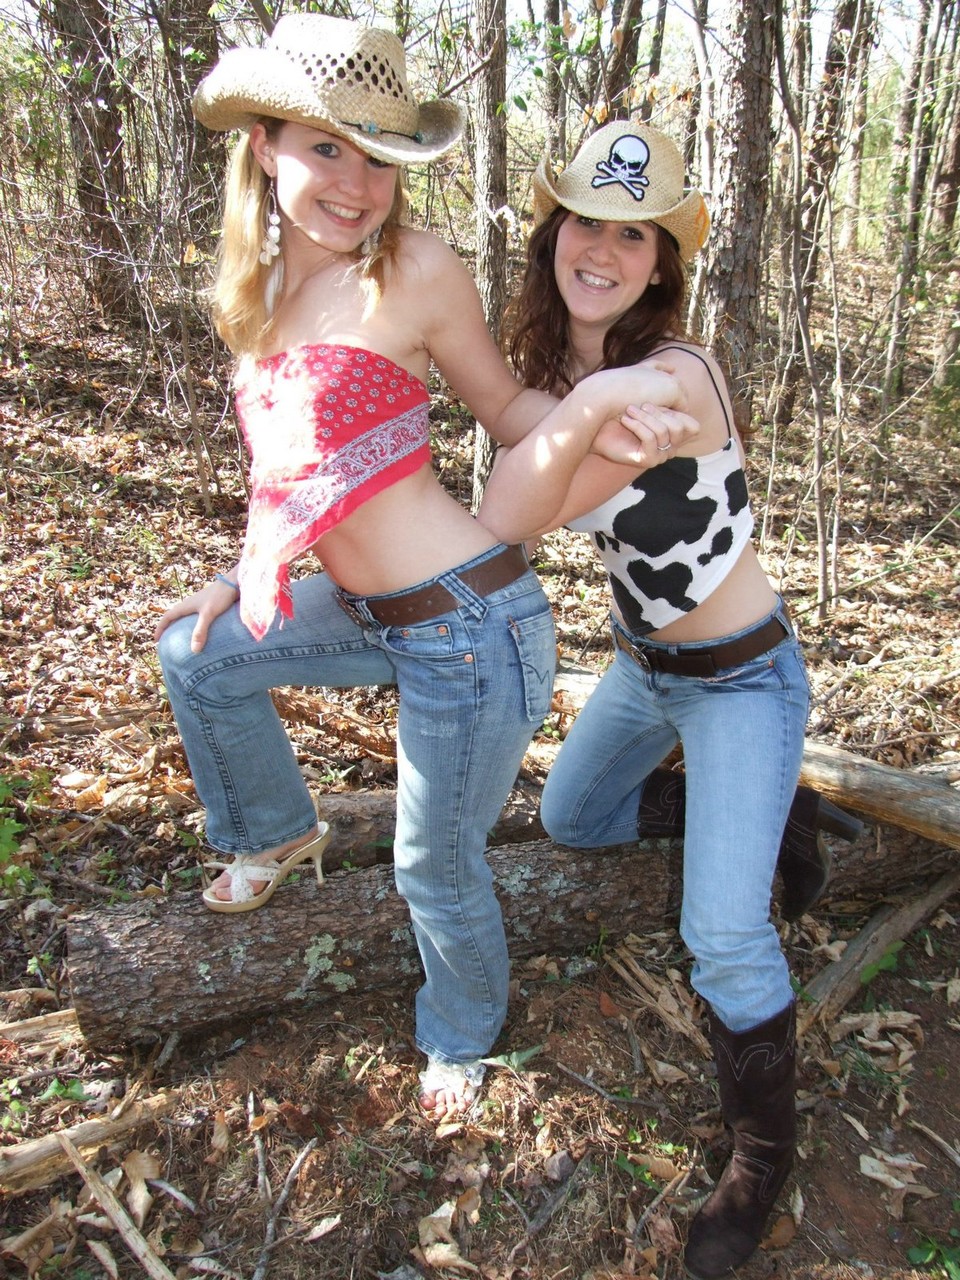 Cowgirl lesbians Kitty and Anna show their titties in the forest photo porno #427006705 | Teen Dreams Pics, Anna, Kitty, Jeans, porno mobile